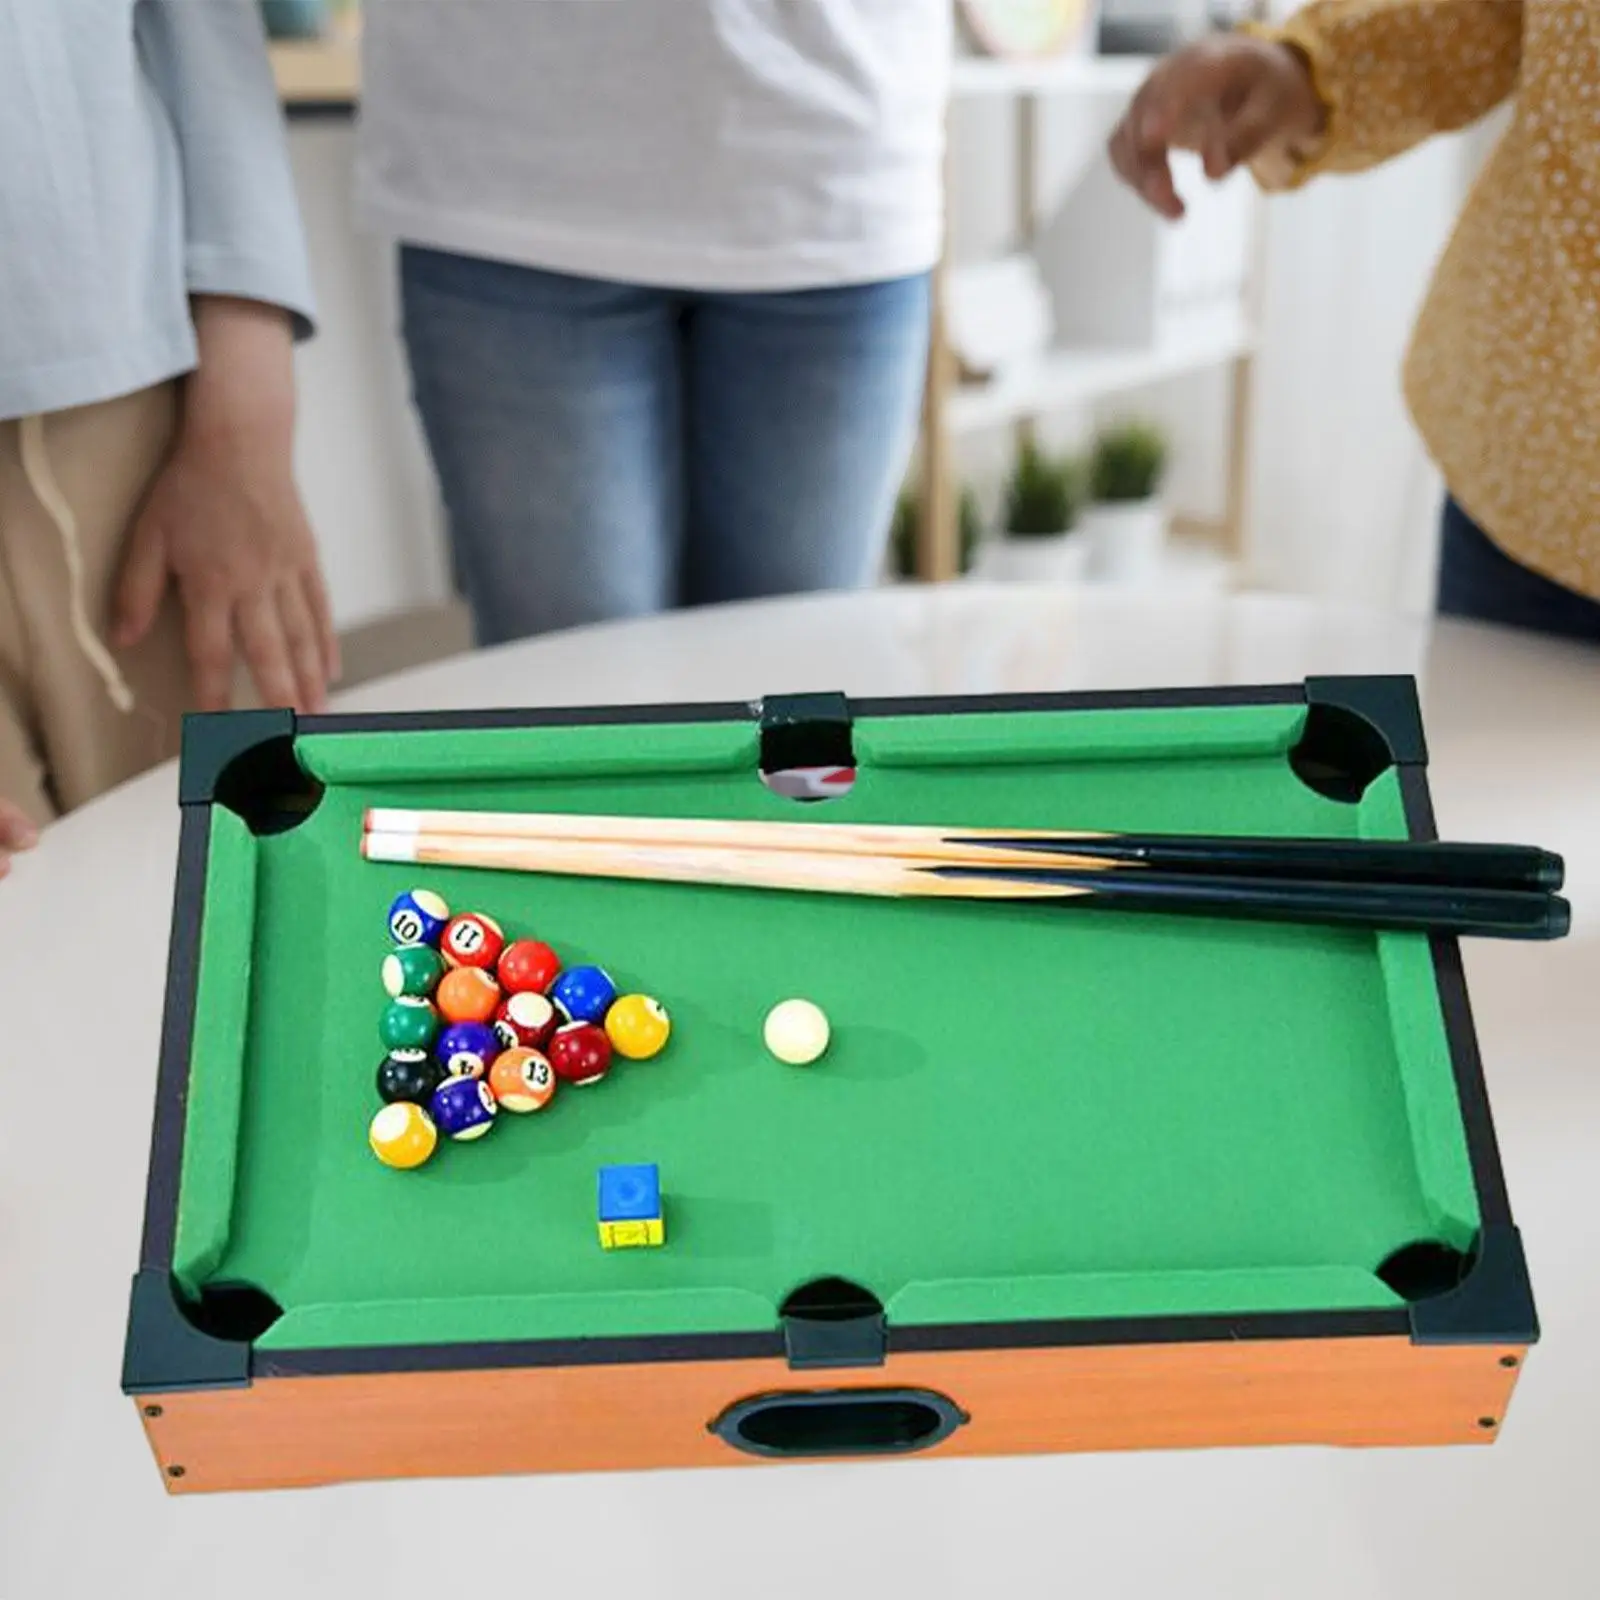 Mini Table Pool Set Snooker Home Play with Game Balls Easily Set Billiards Playset for Office Desk Indoor Playroom